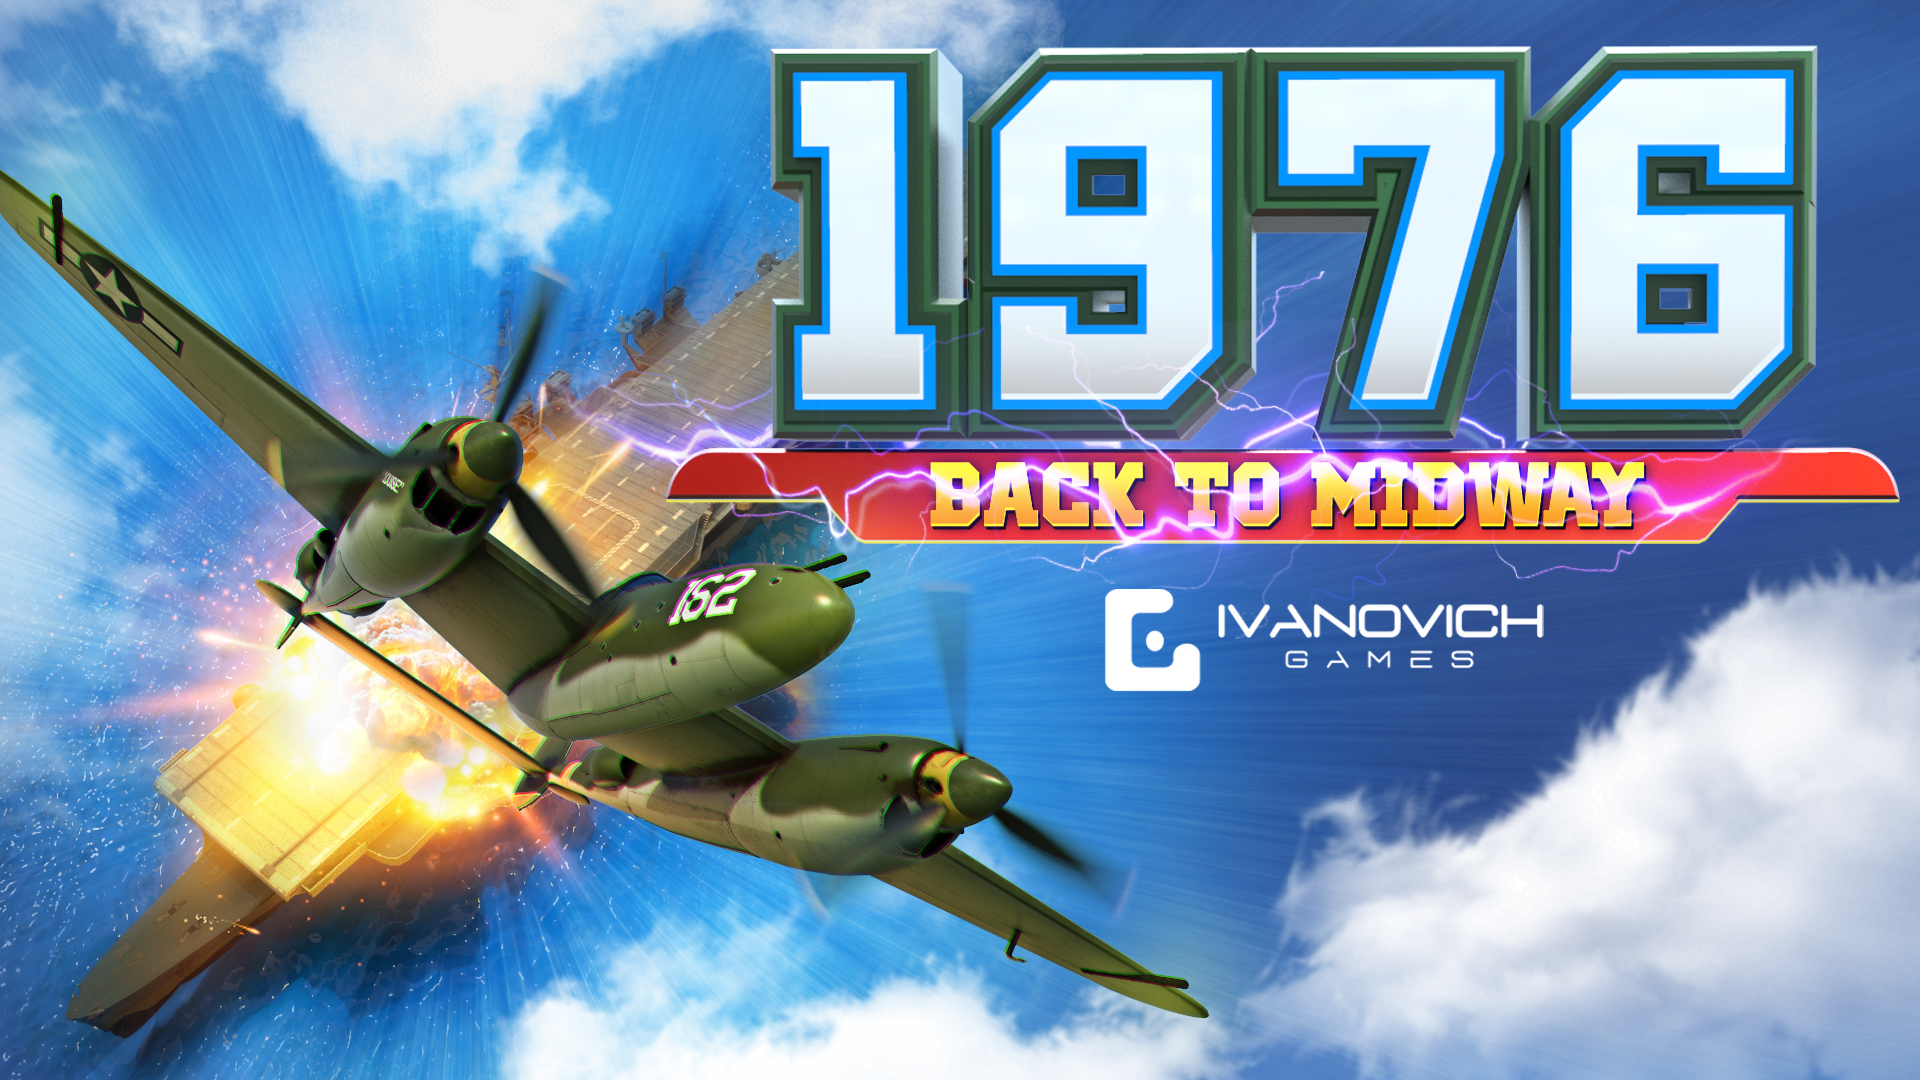 1976: Back to Midway